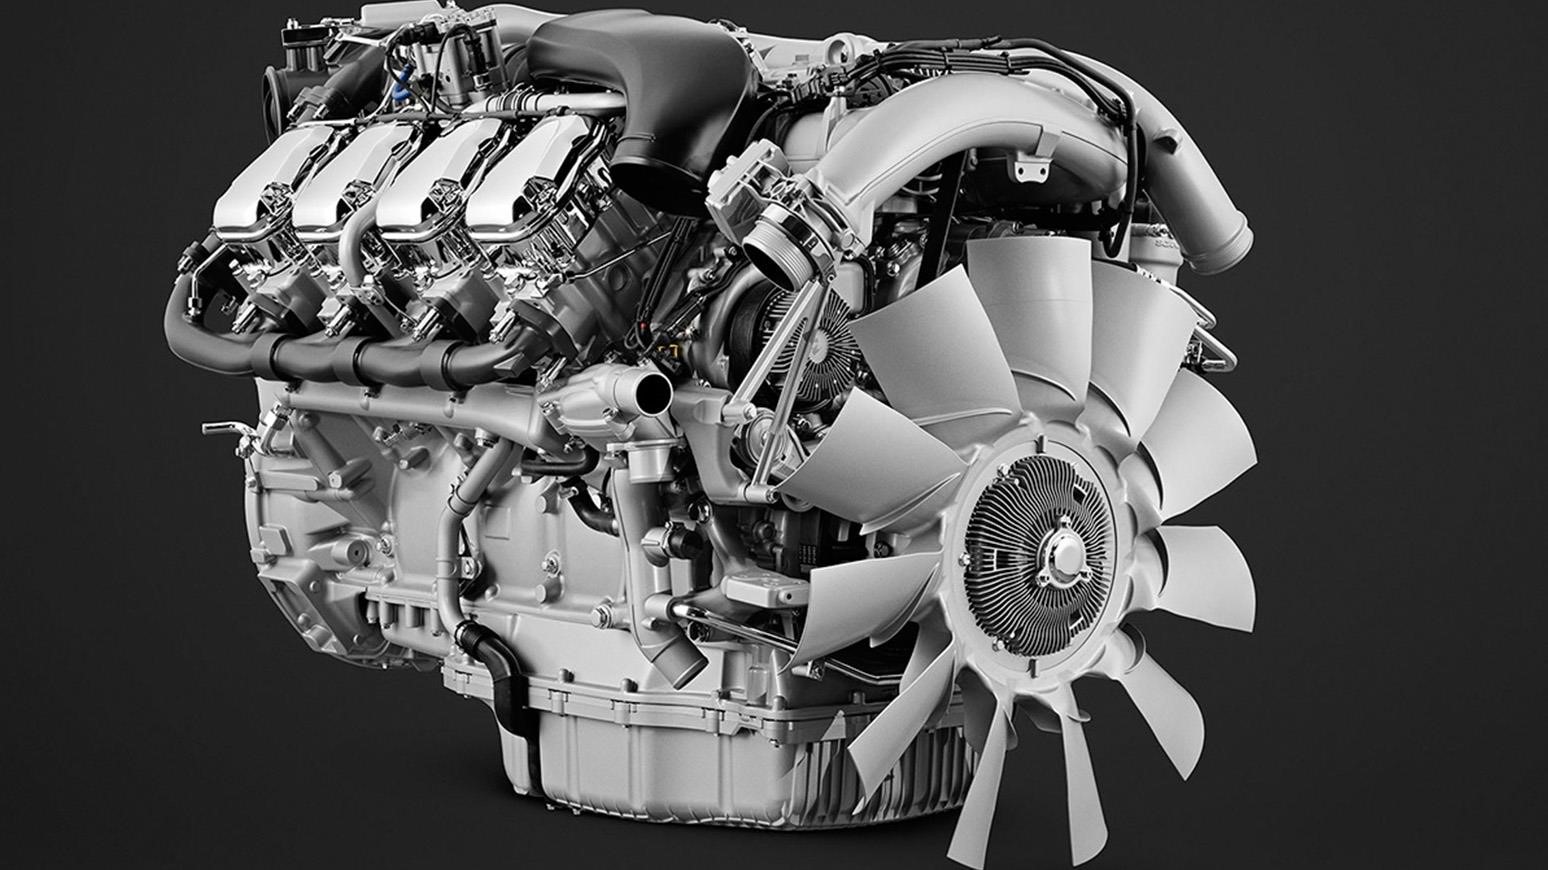 Scania V8 Production Up & Running Again After Strike